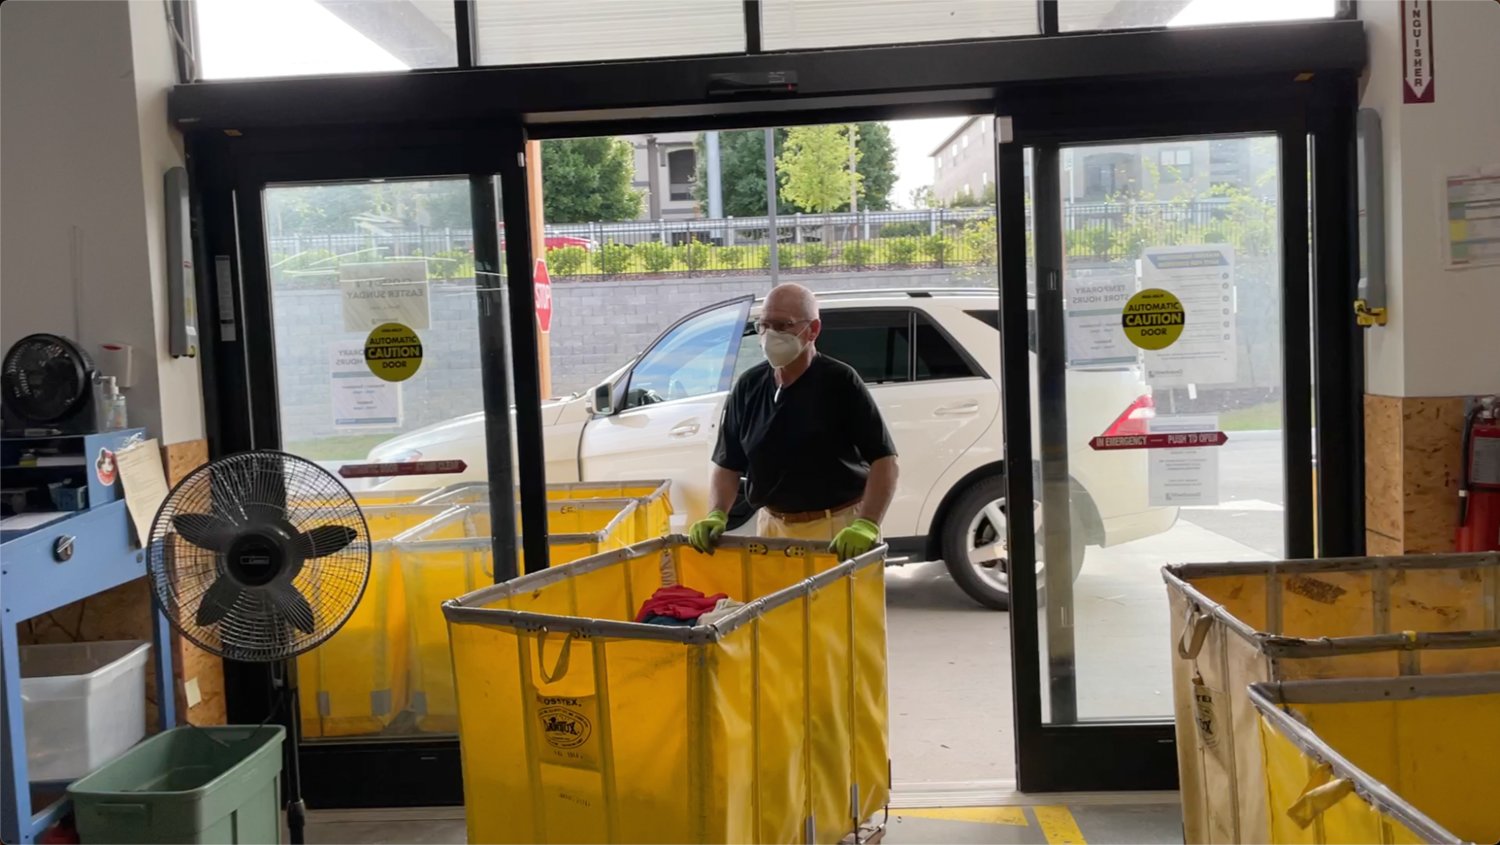 Goodwill employee accepting a donation drop-off